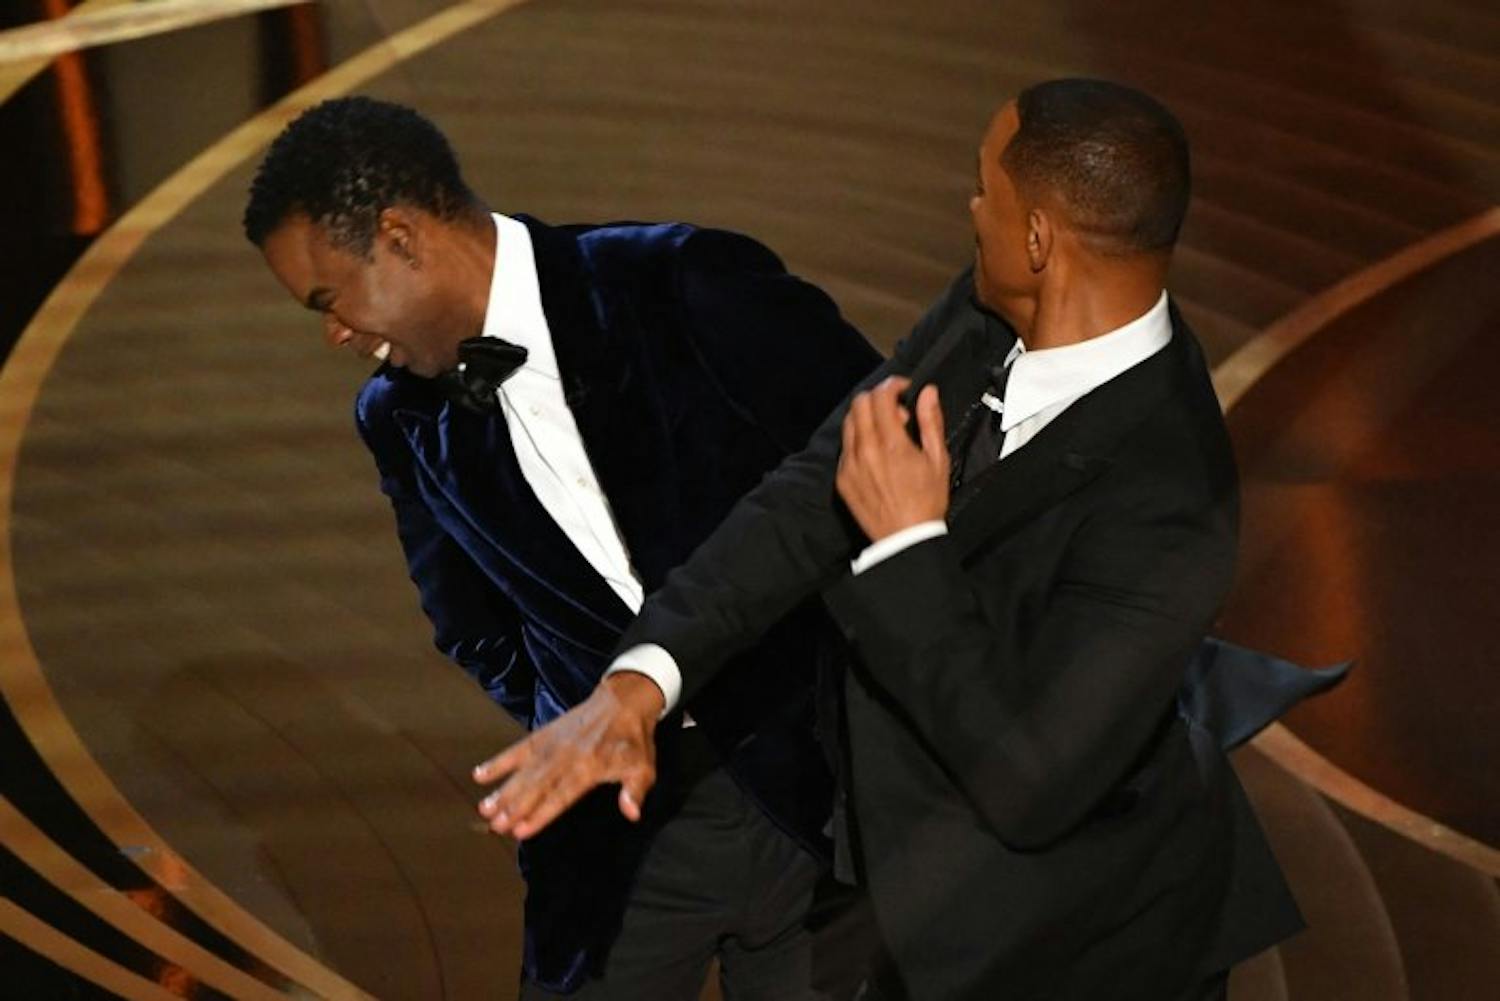 "I would have slapped him if he spoke about my wife like that." #WillSmithChrisRock